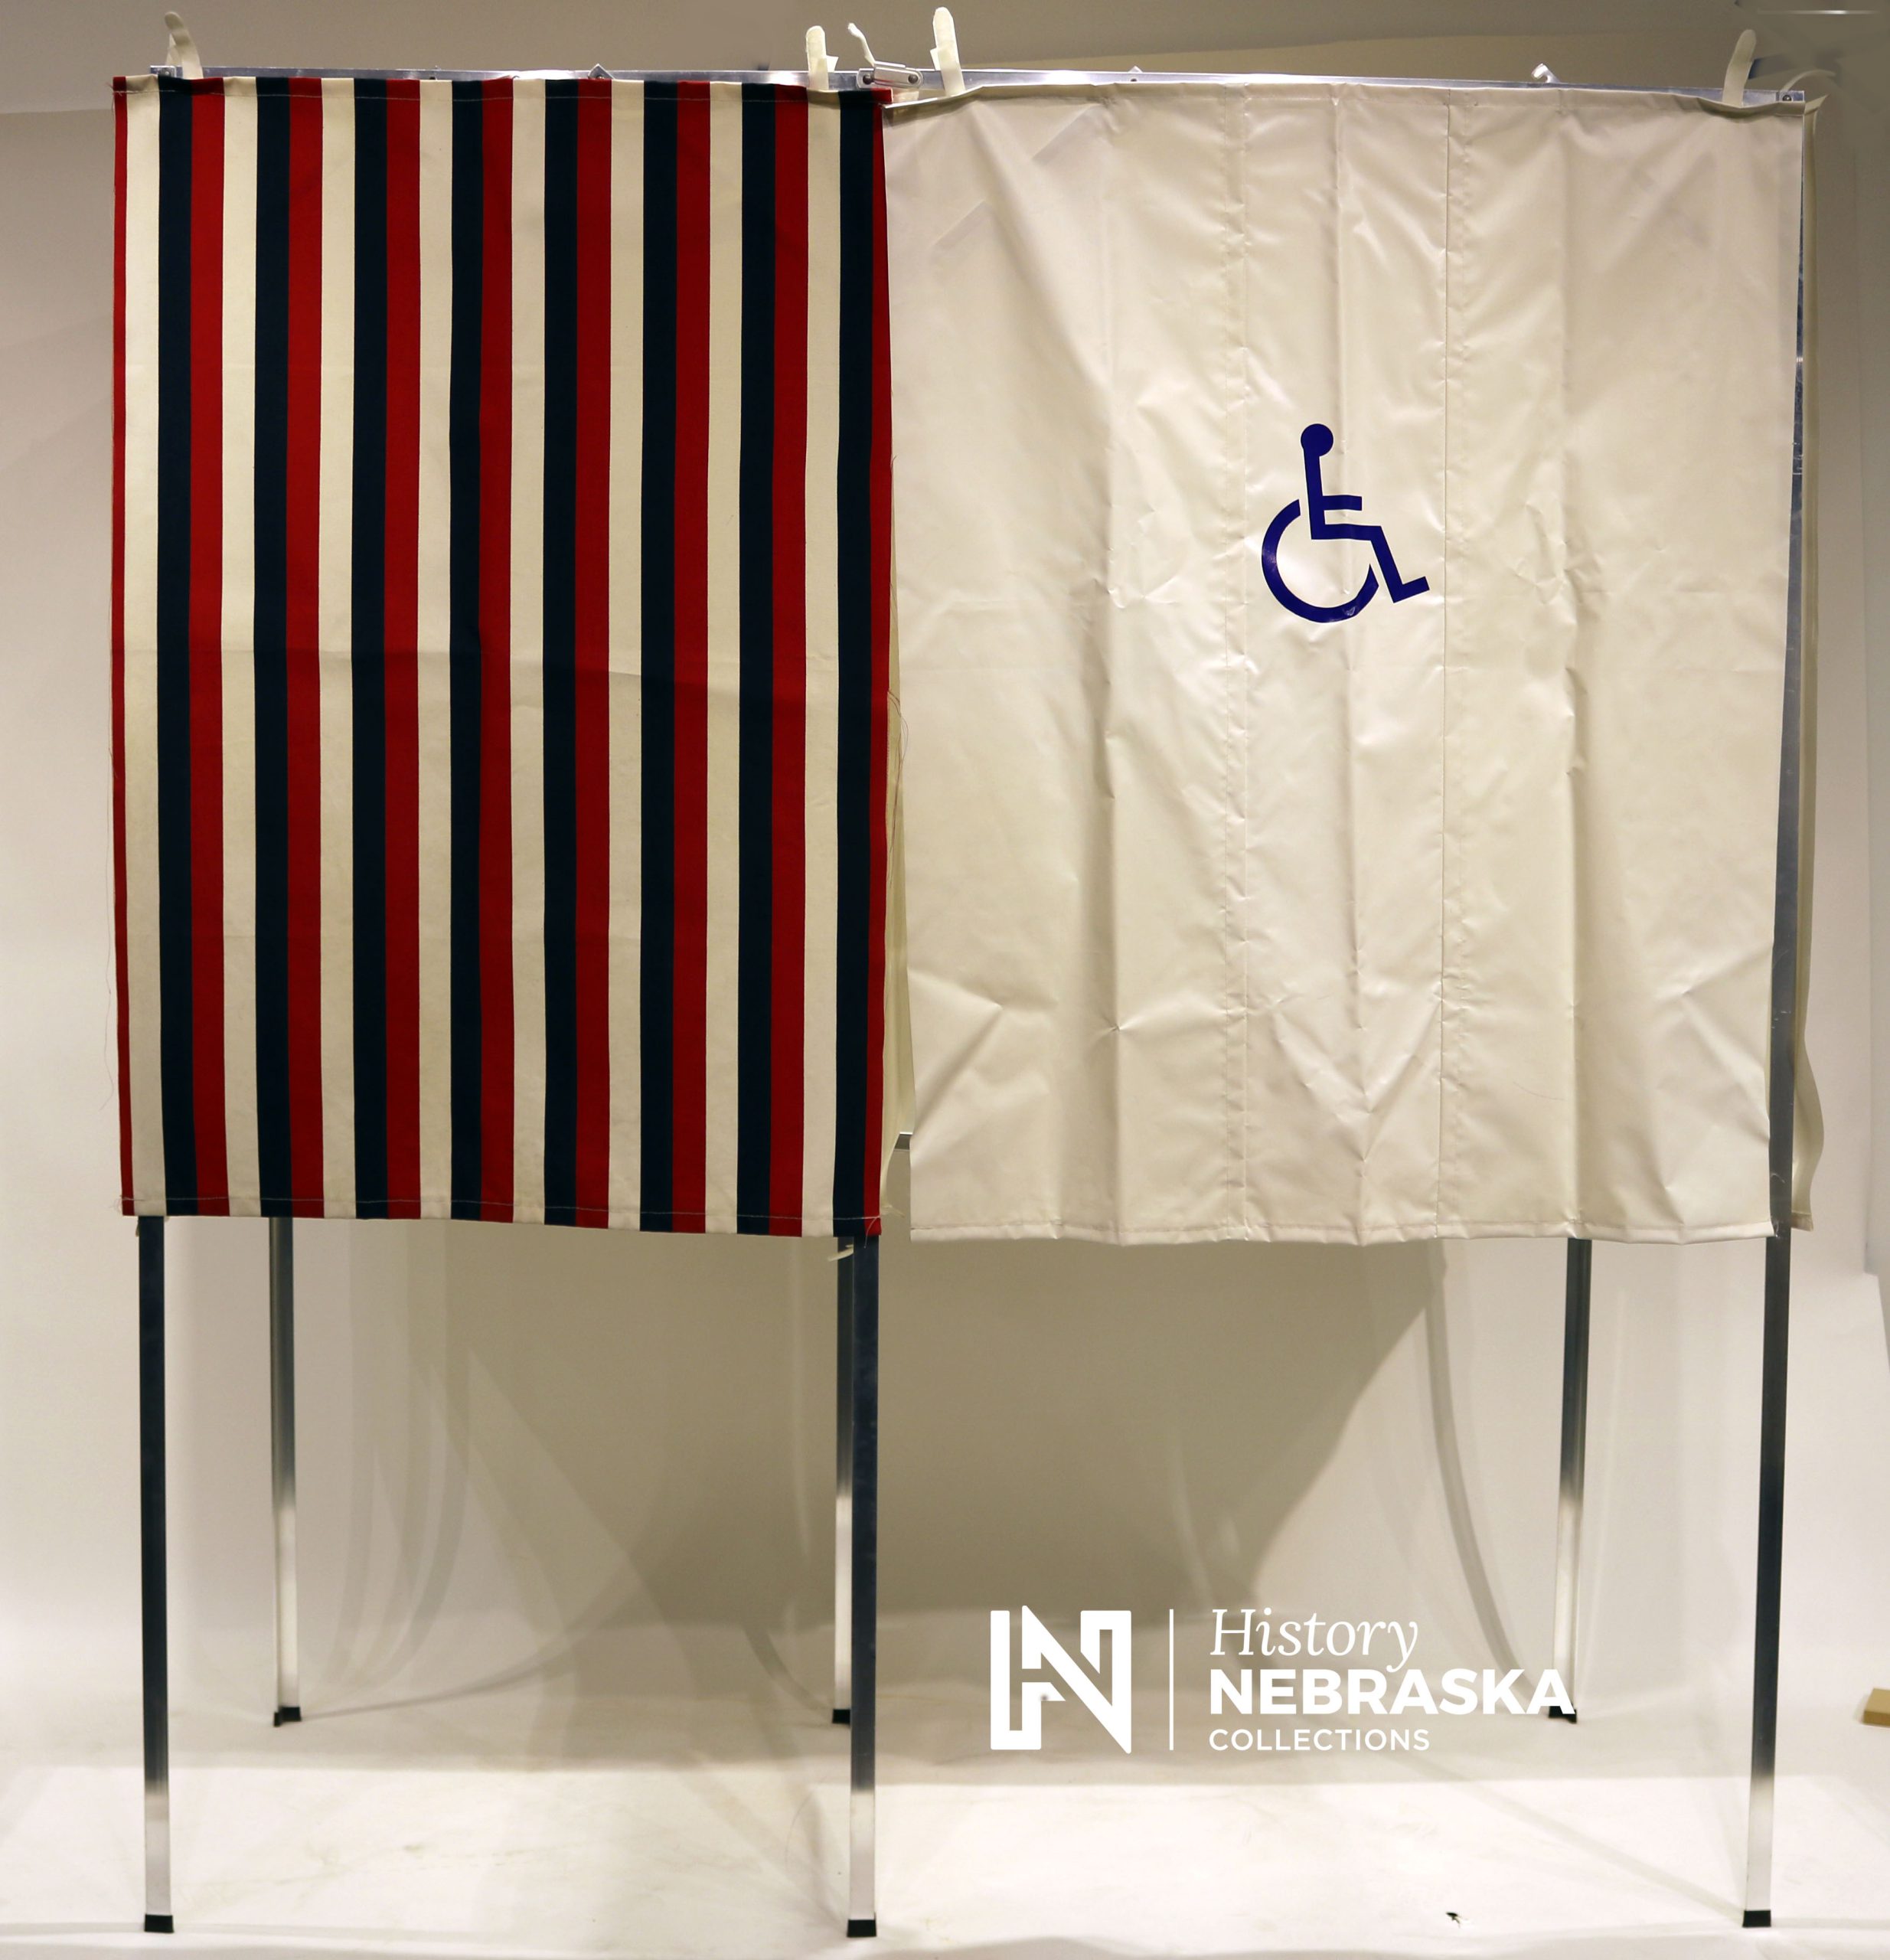 inside voting booth